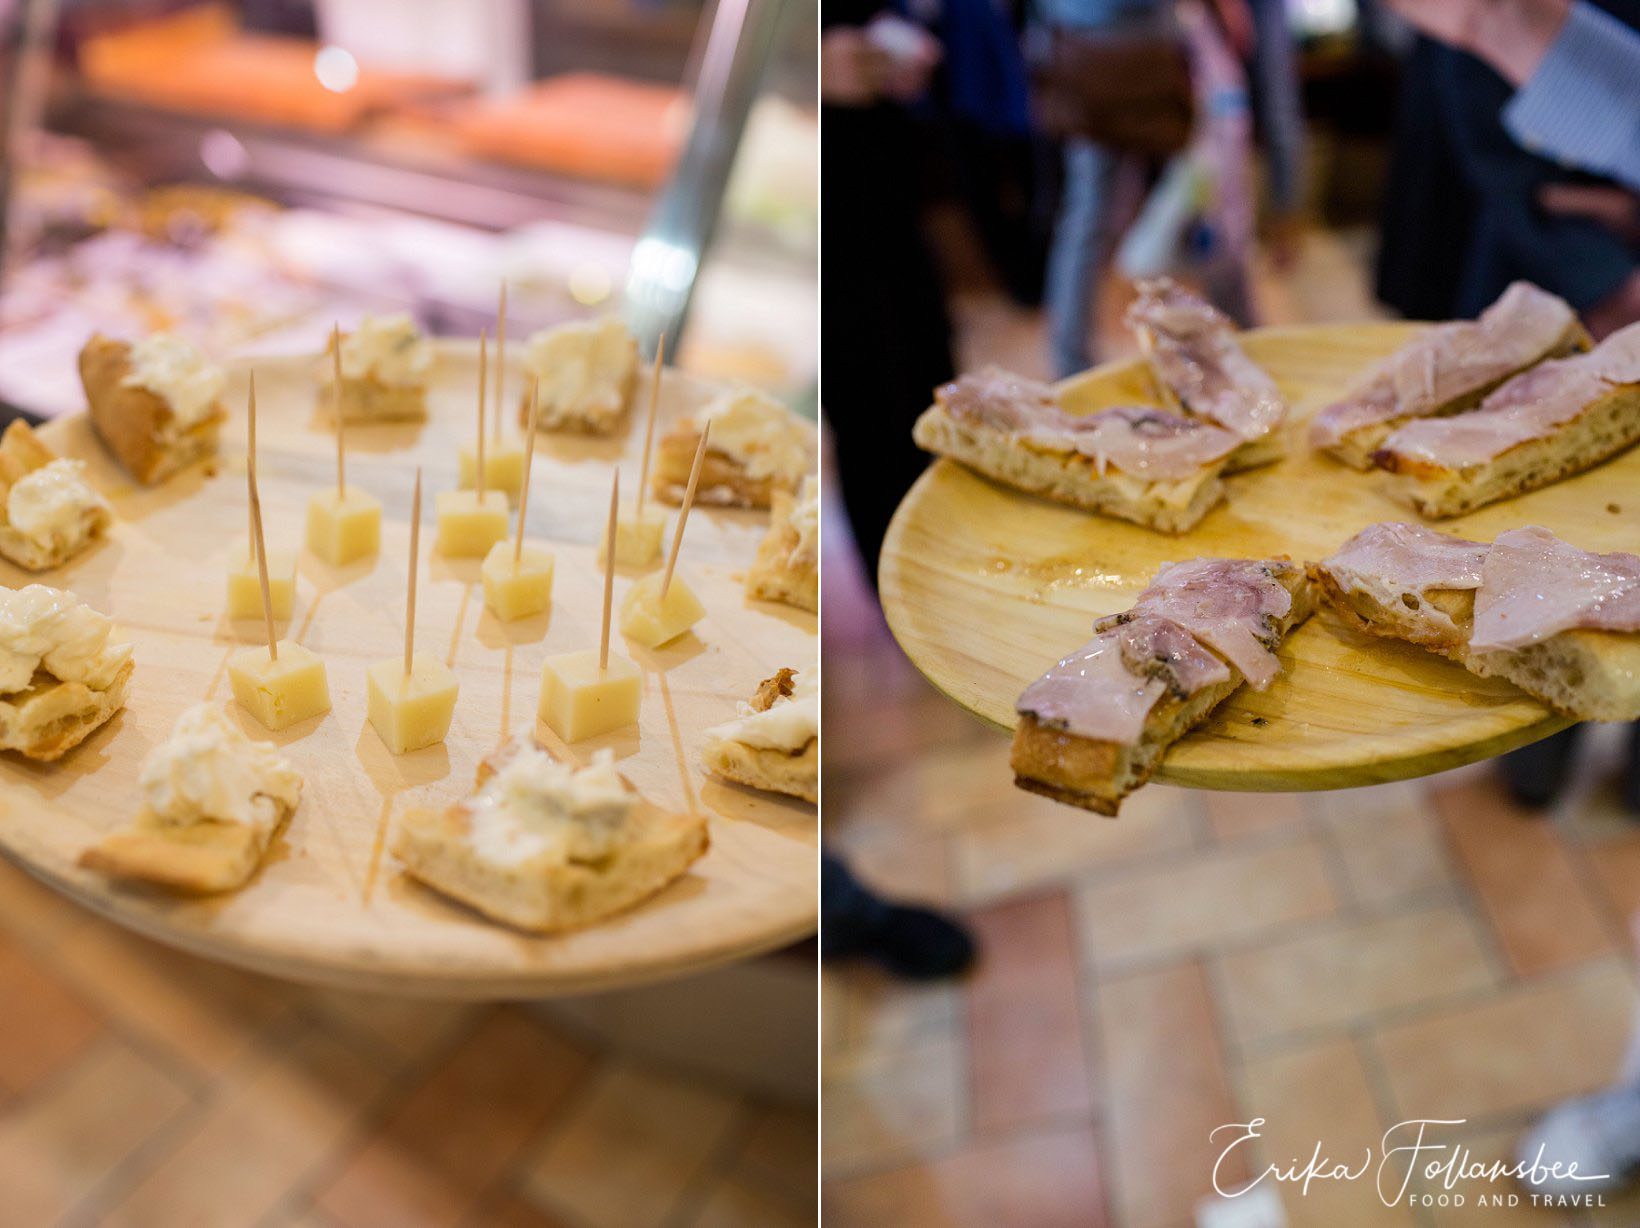 Sampling meats and cheeses in Antica Norcineria, Trastevere